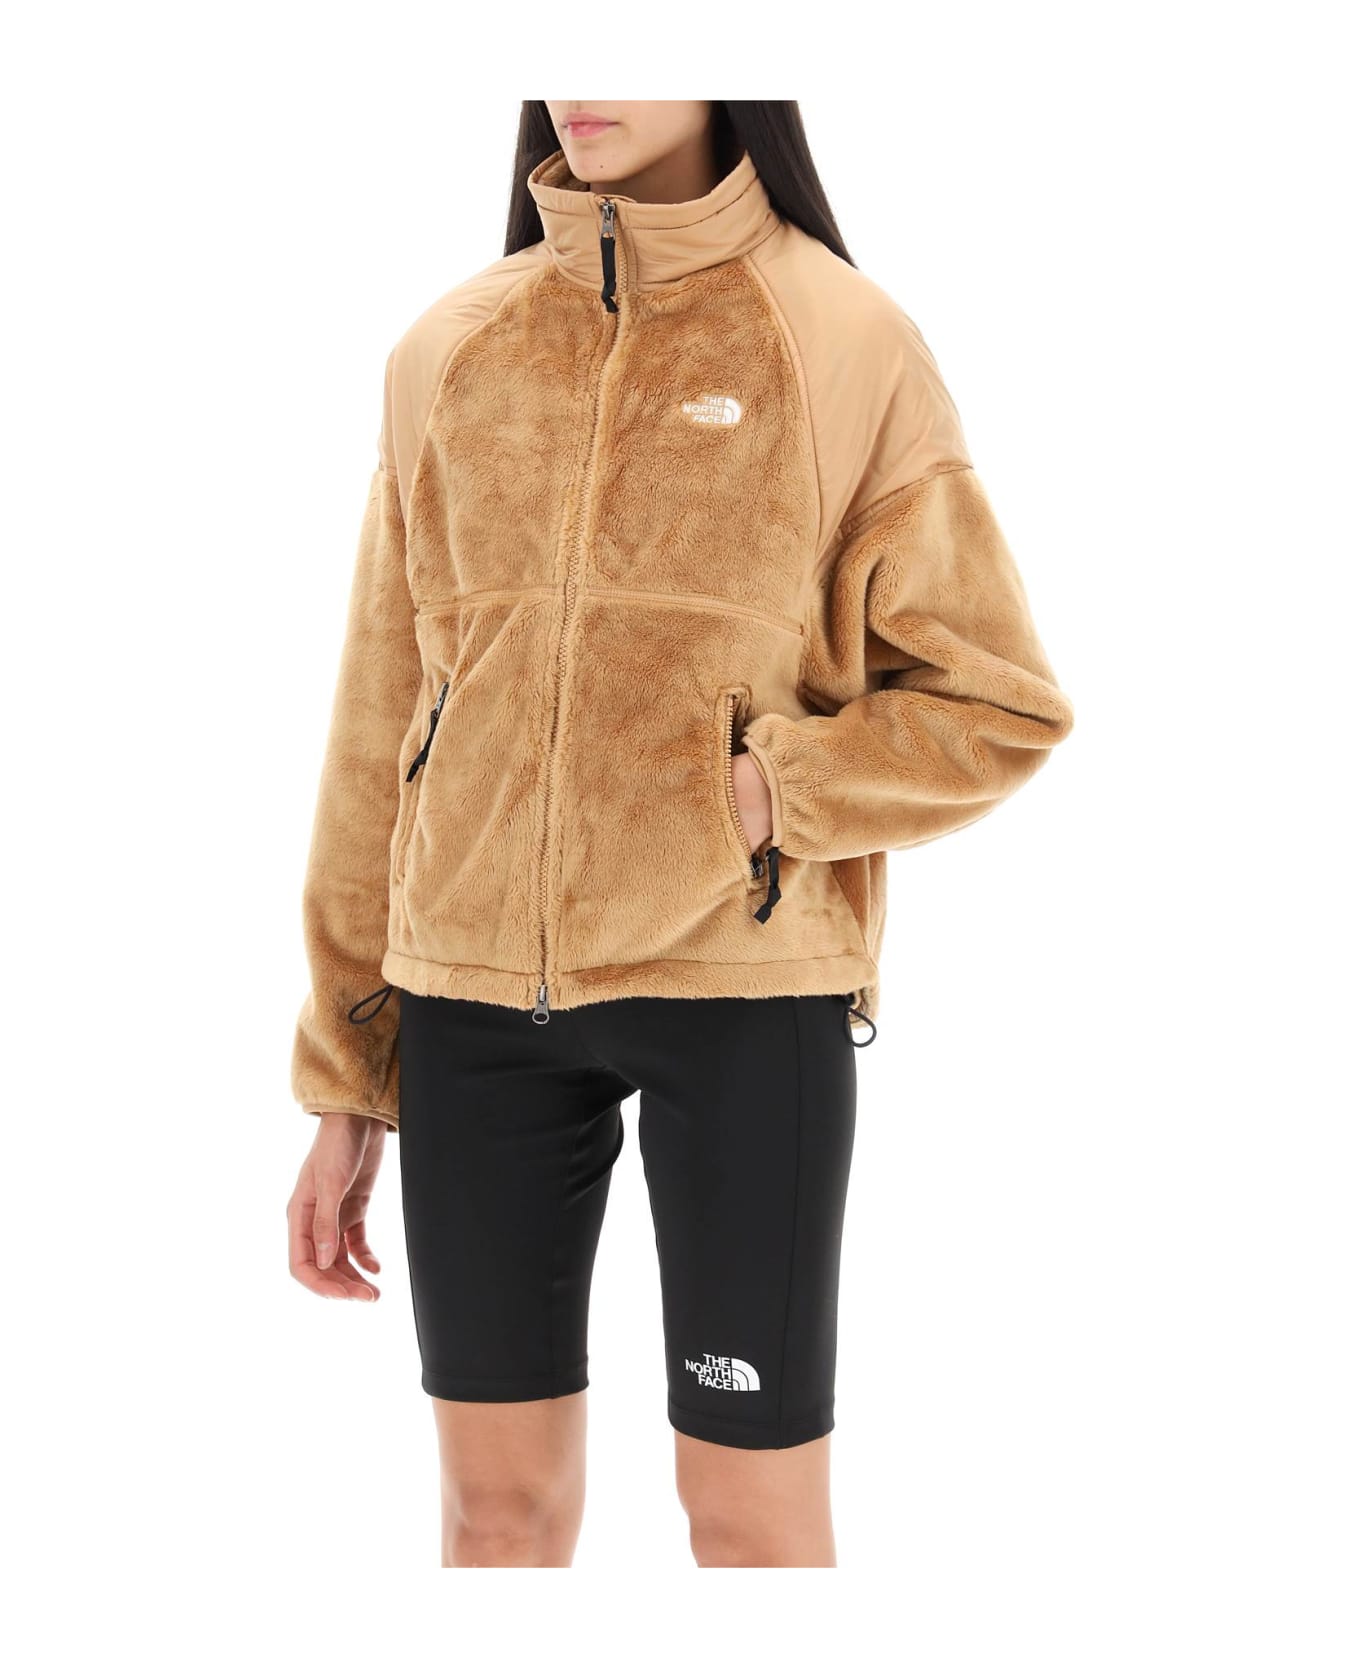 The North Face Versa Velour Jacket In Recycled Fleece And Ripstop - ALMOND BUTTER (Beige)